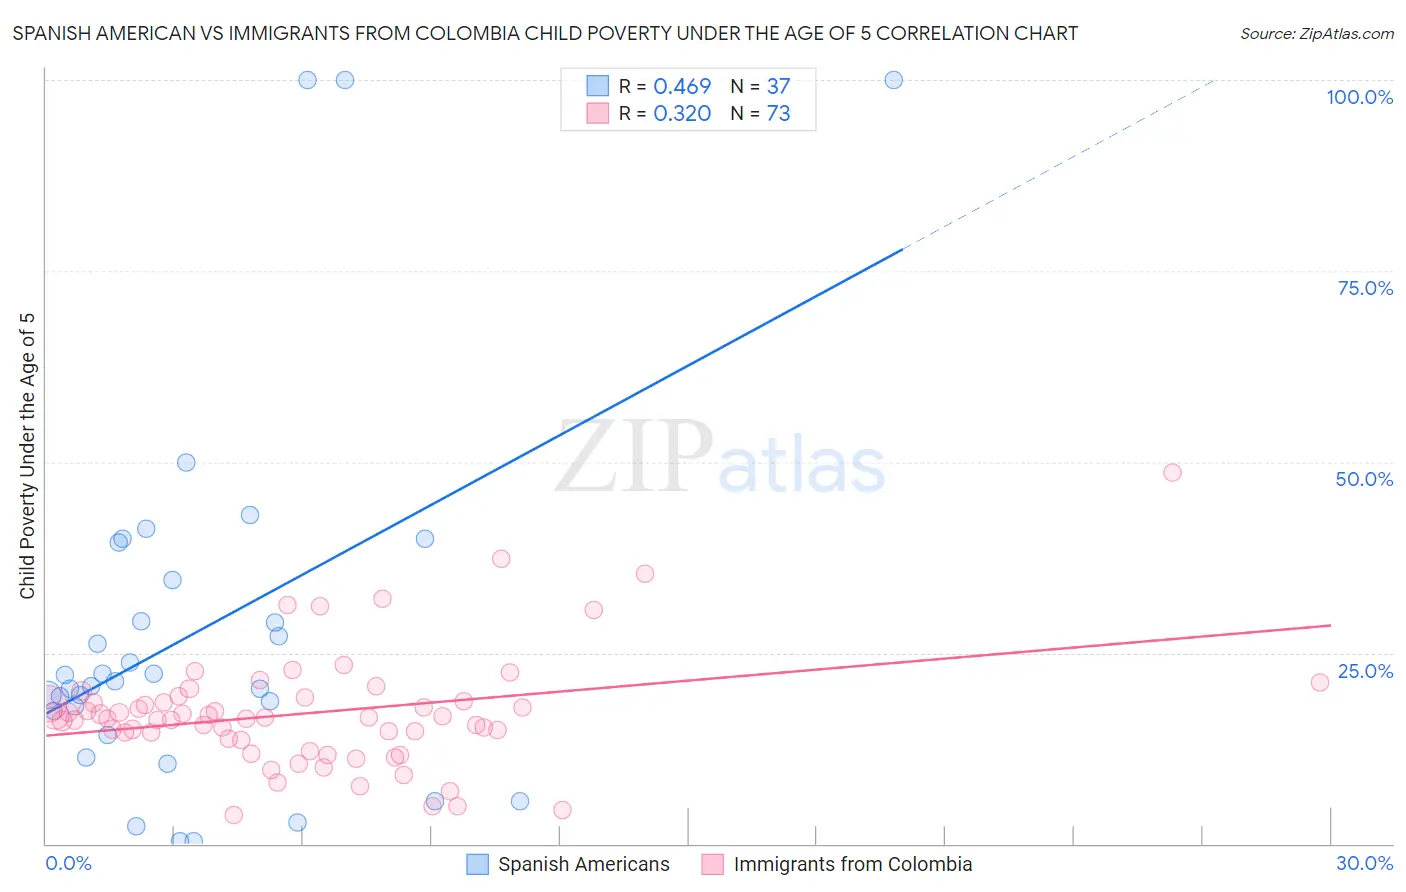 Spanish American vs Immigrants from Colombia Child Poverty Under the Age of 5